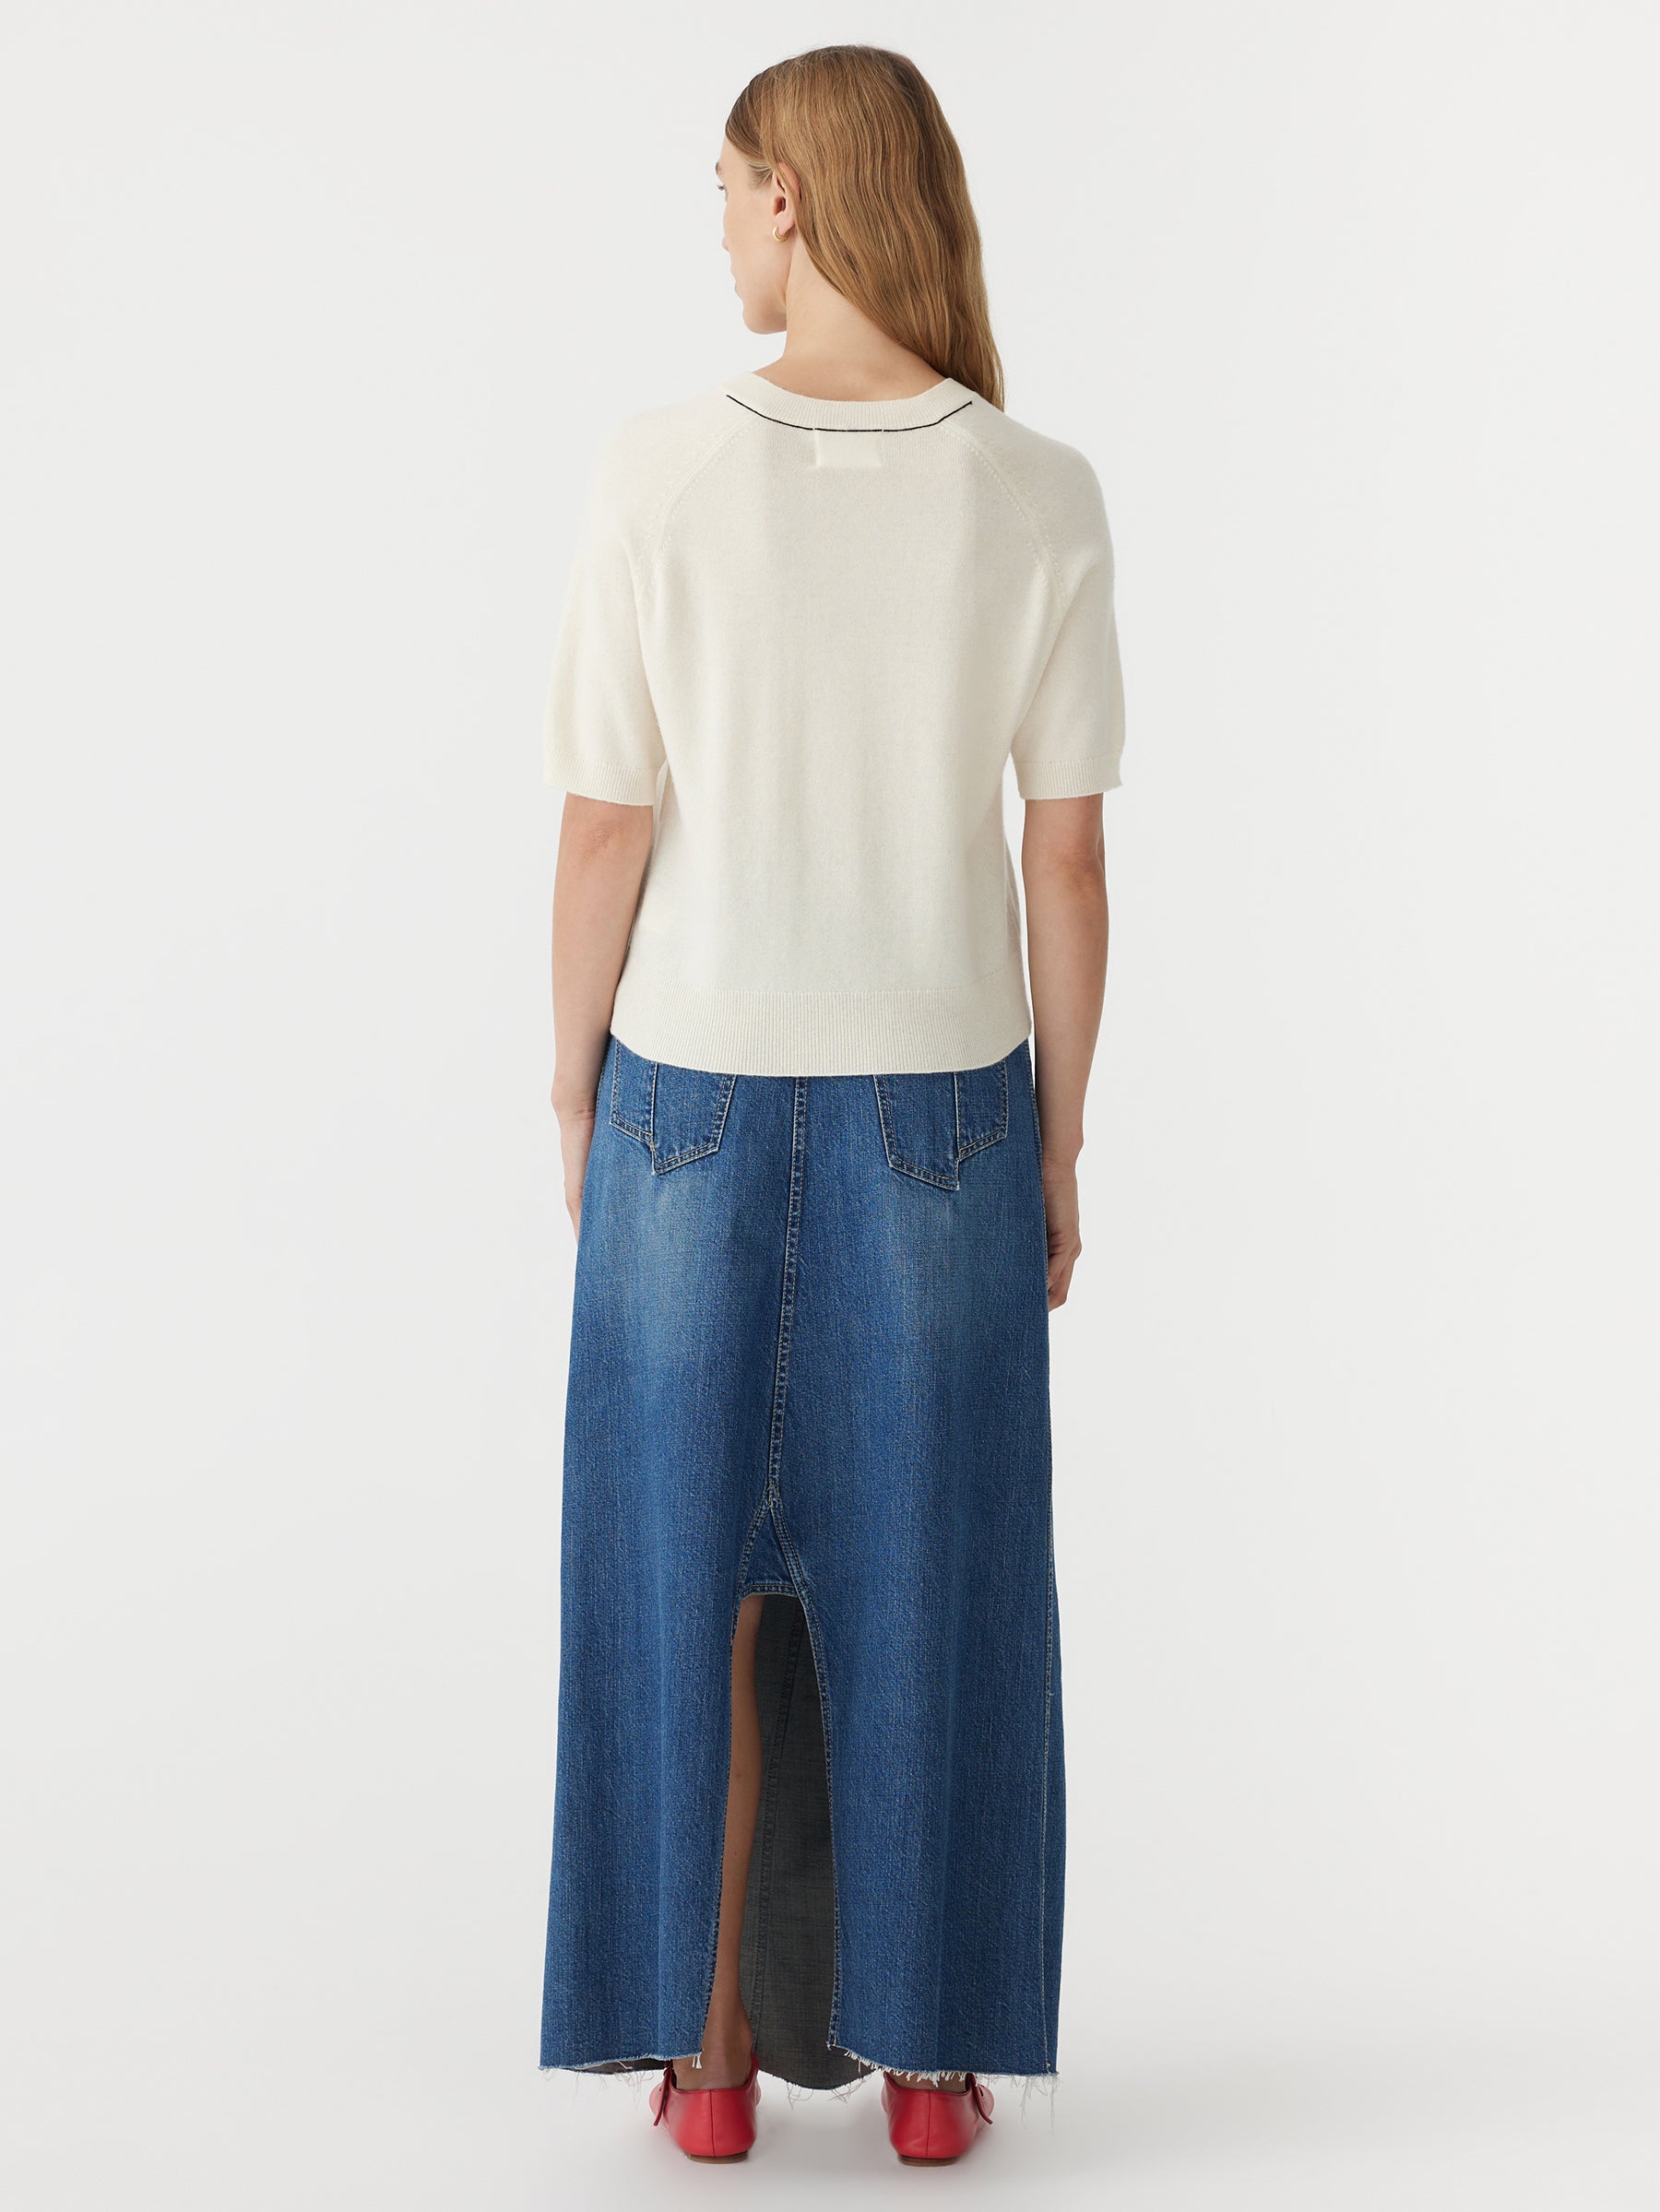 Wool Cashmere T-shirt Knit in White back